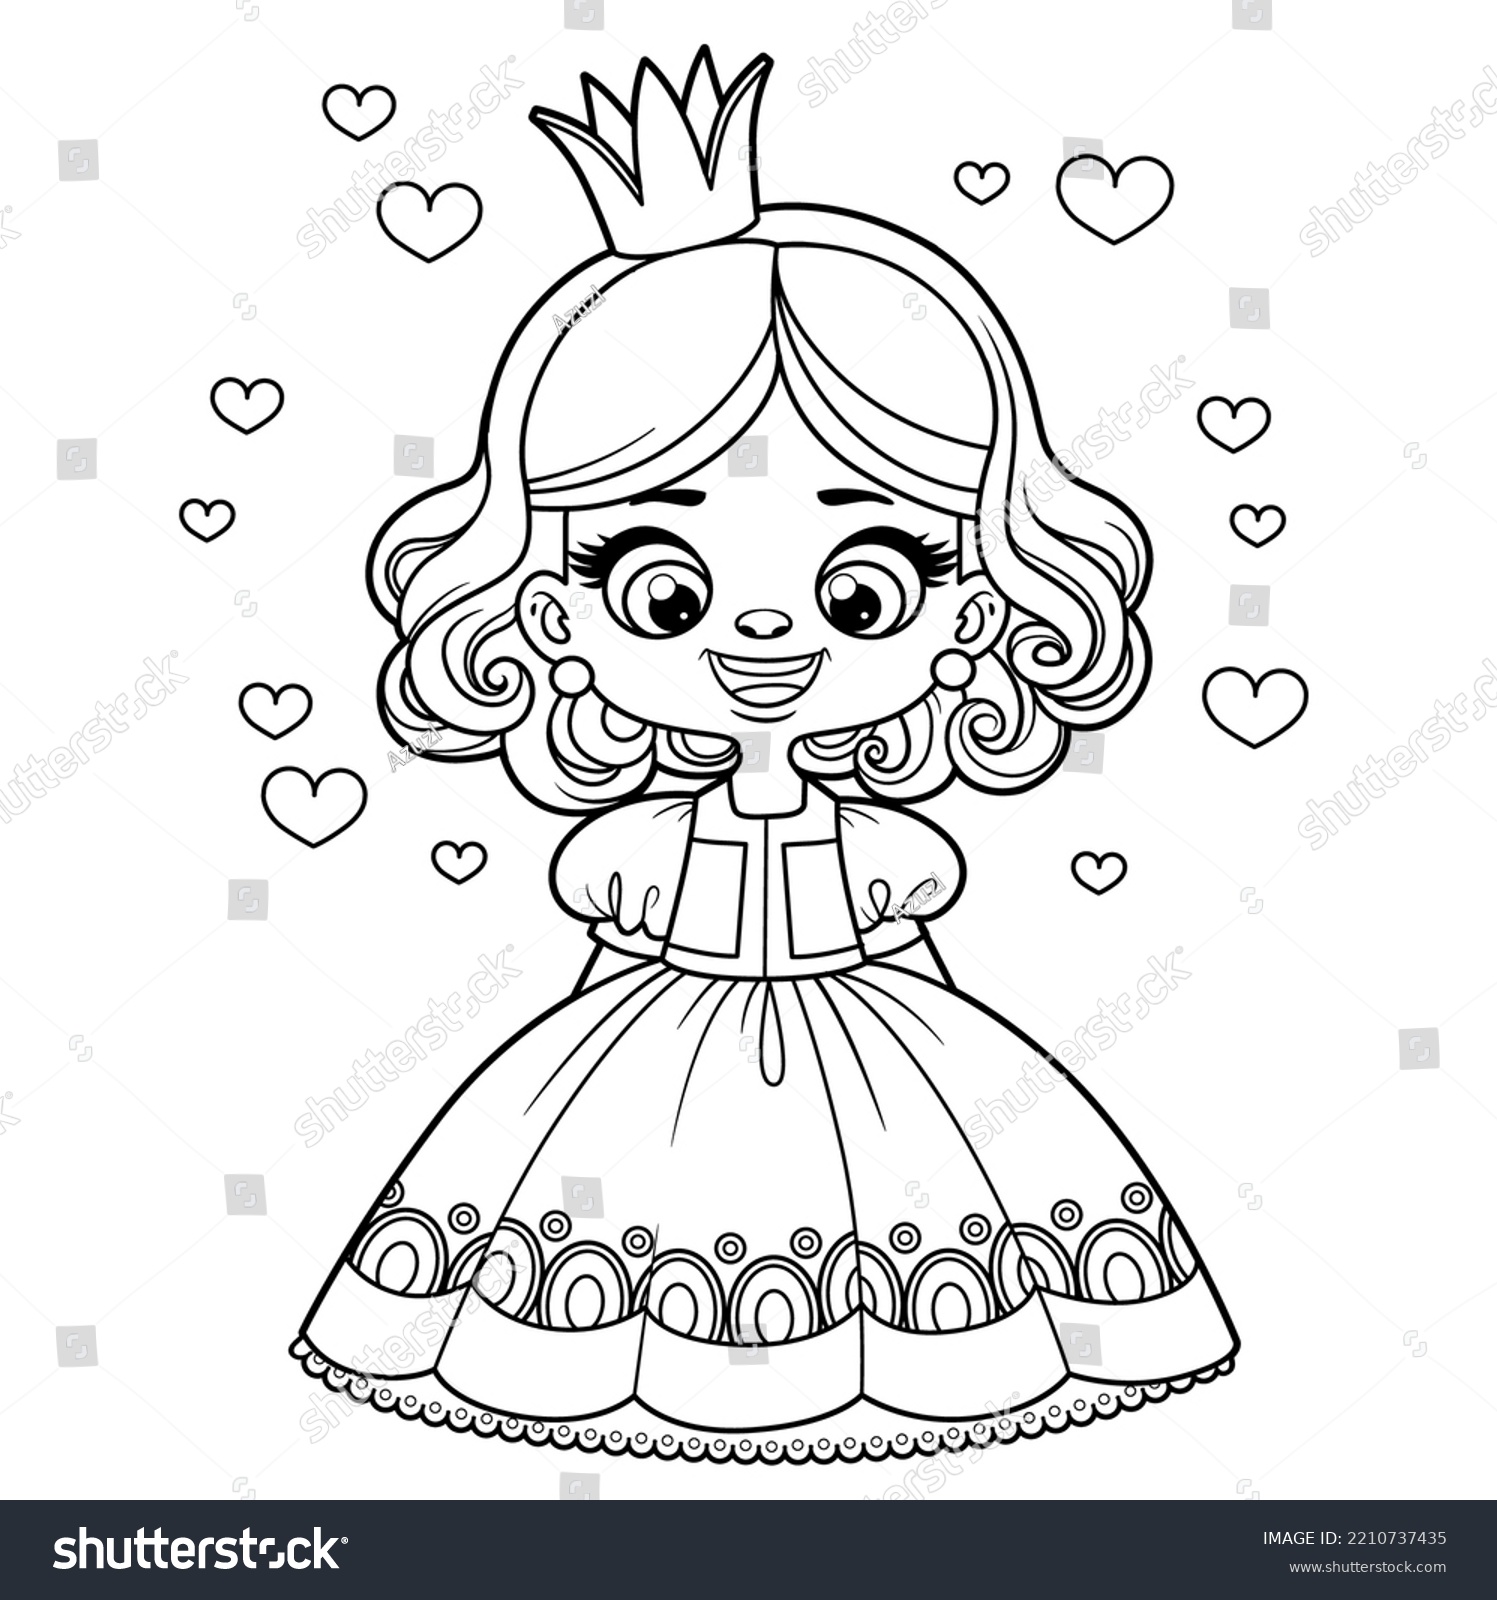 Stock Vector Cute Cartoon Curly Haired Girl In A Princess Dress Outlined For Coloring Page On White Background 2210737435 